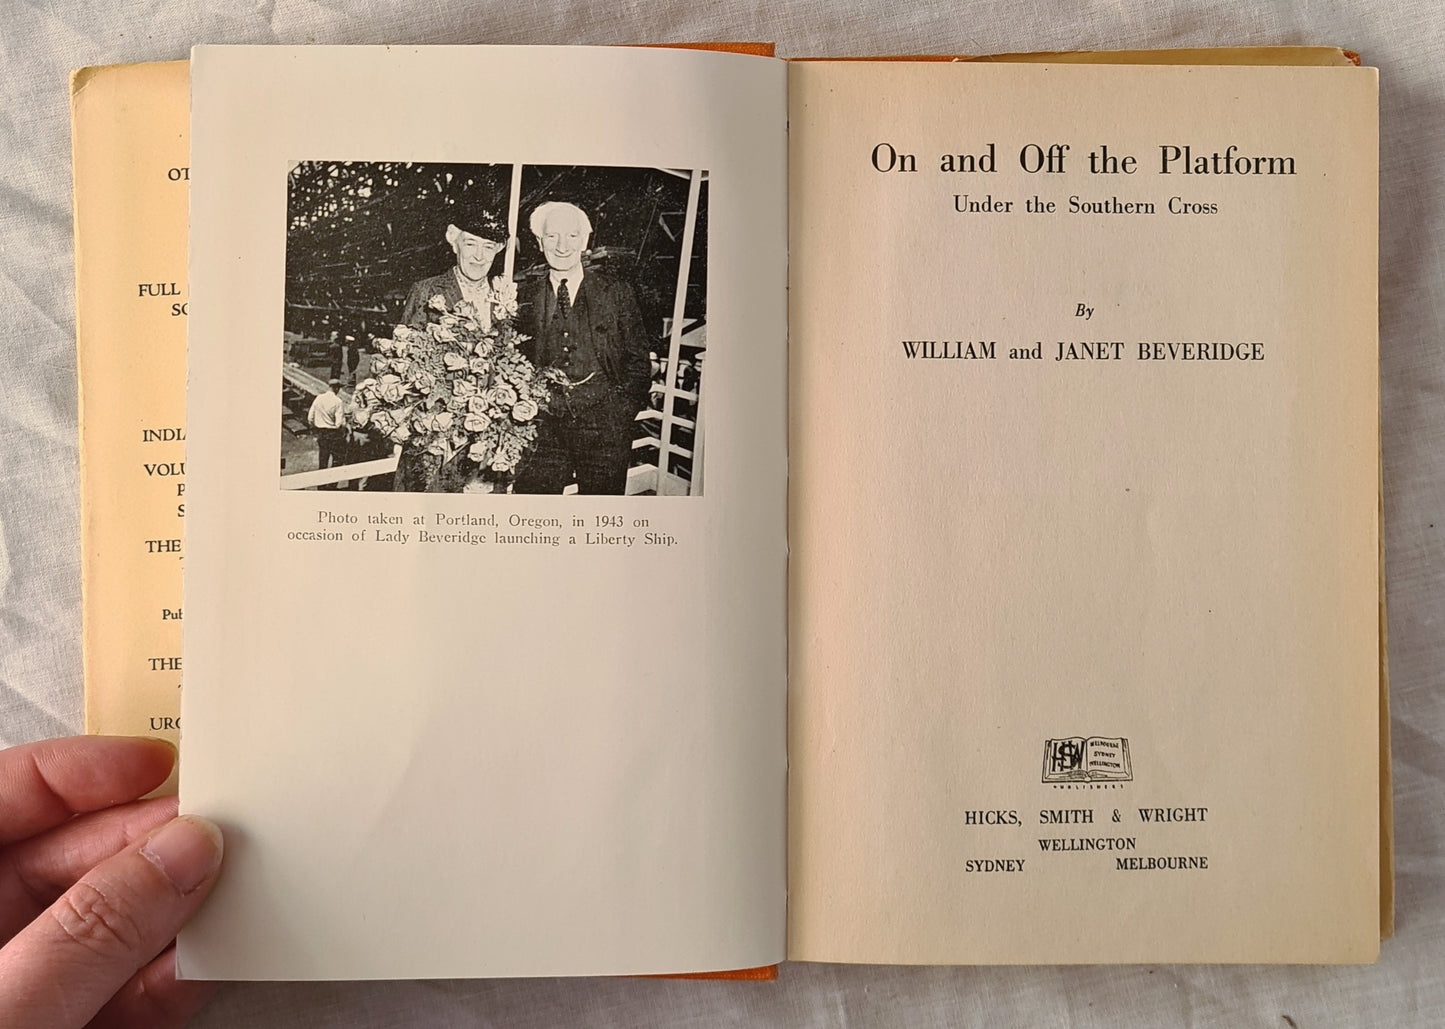 On and Off the Platform by William and Janet Beveridge